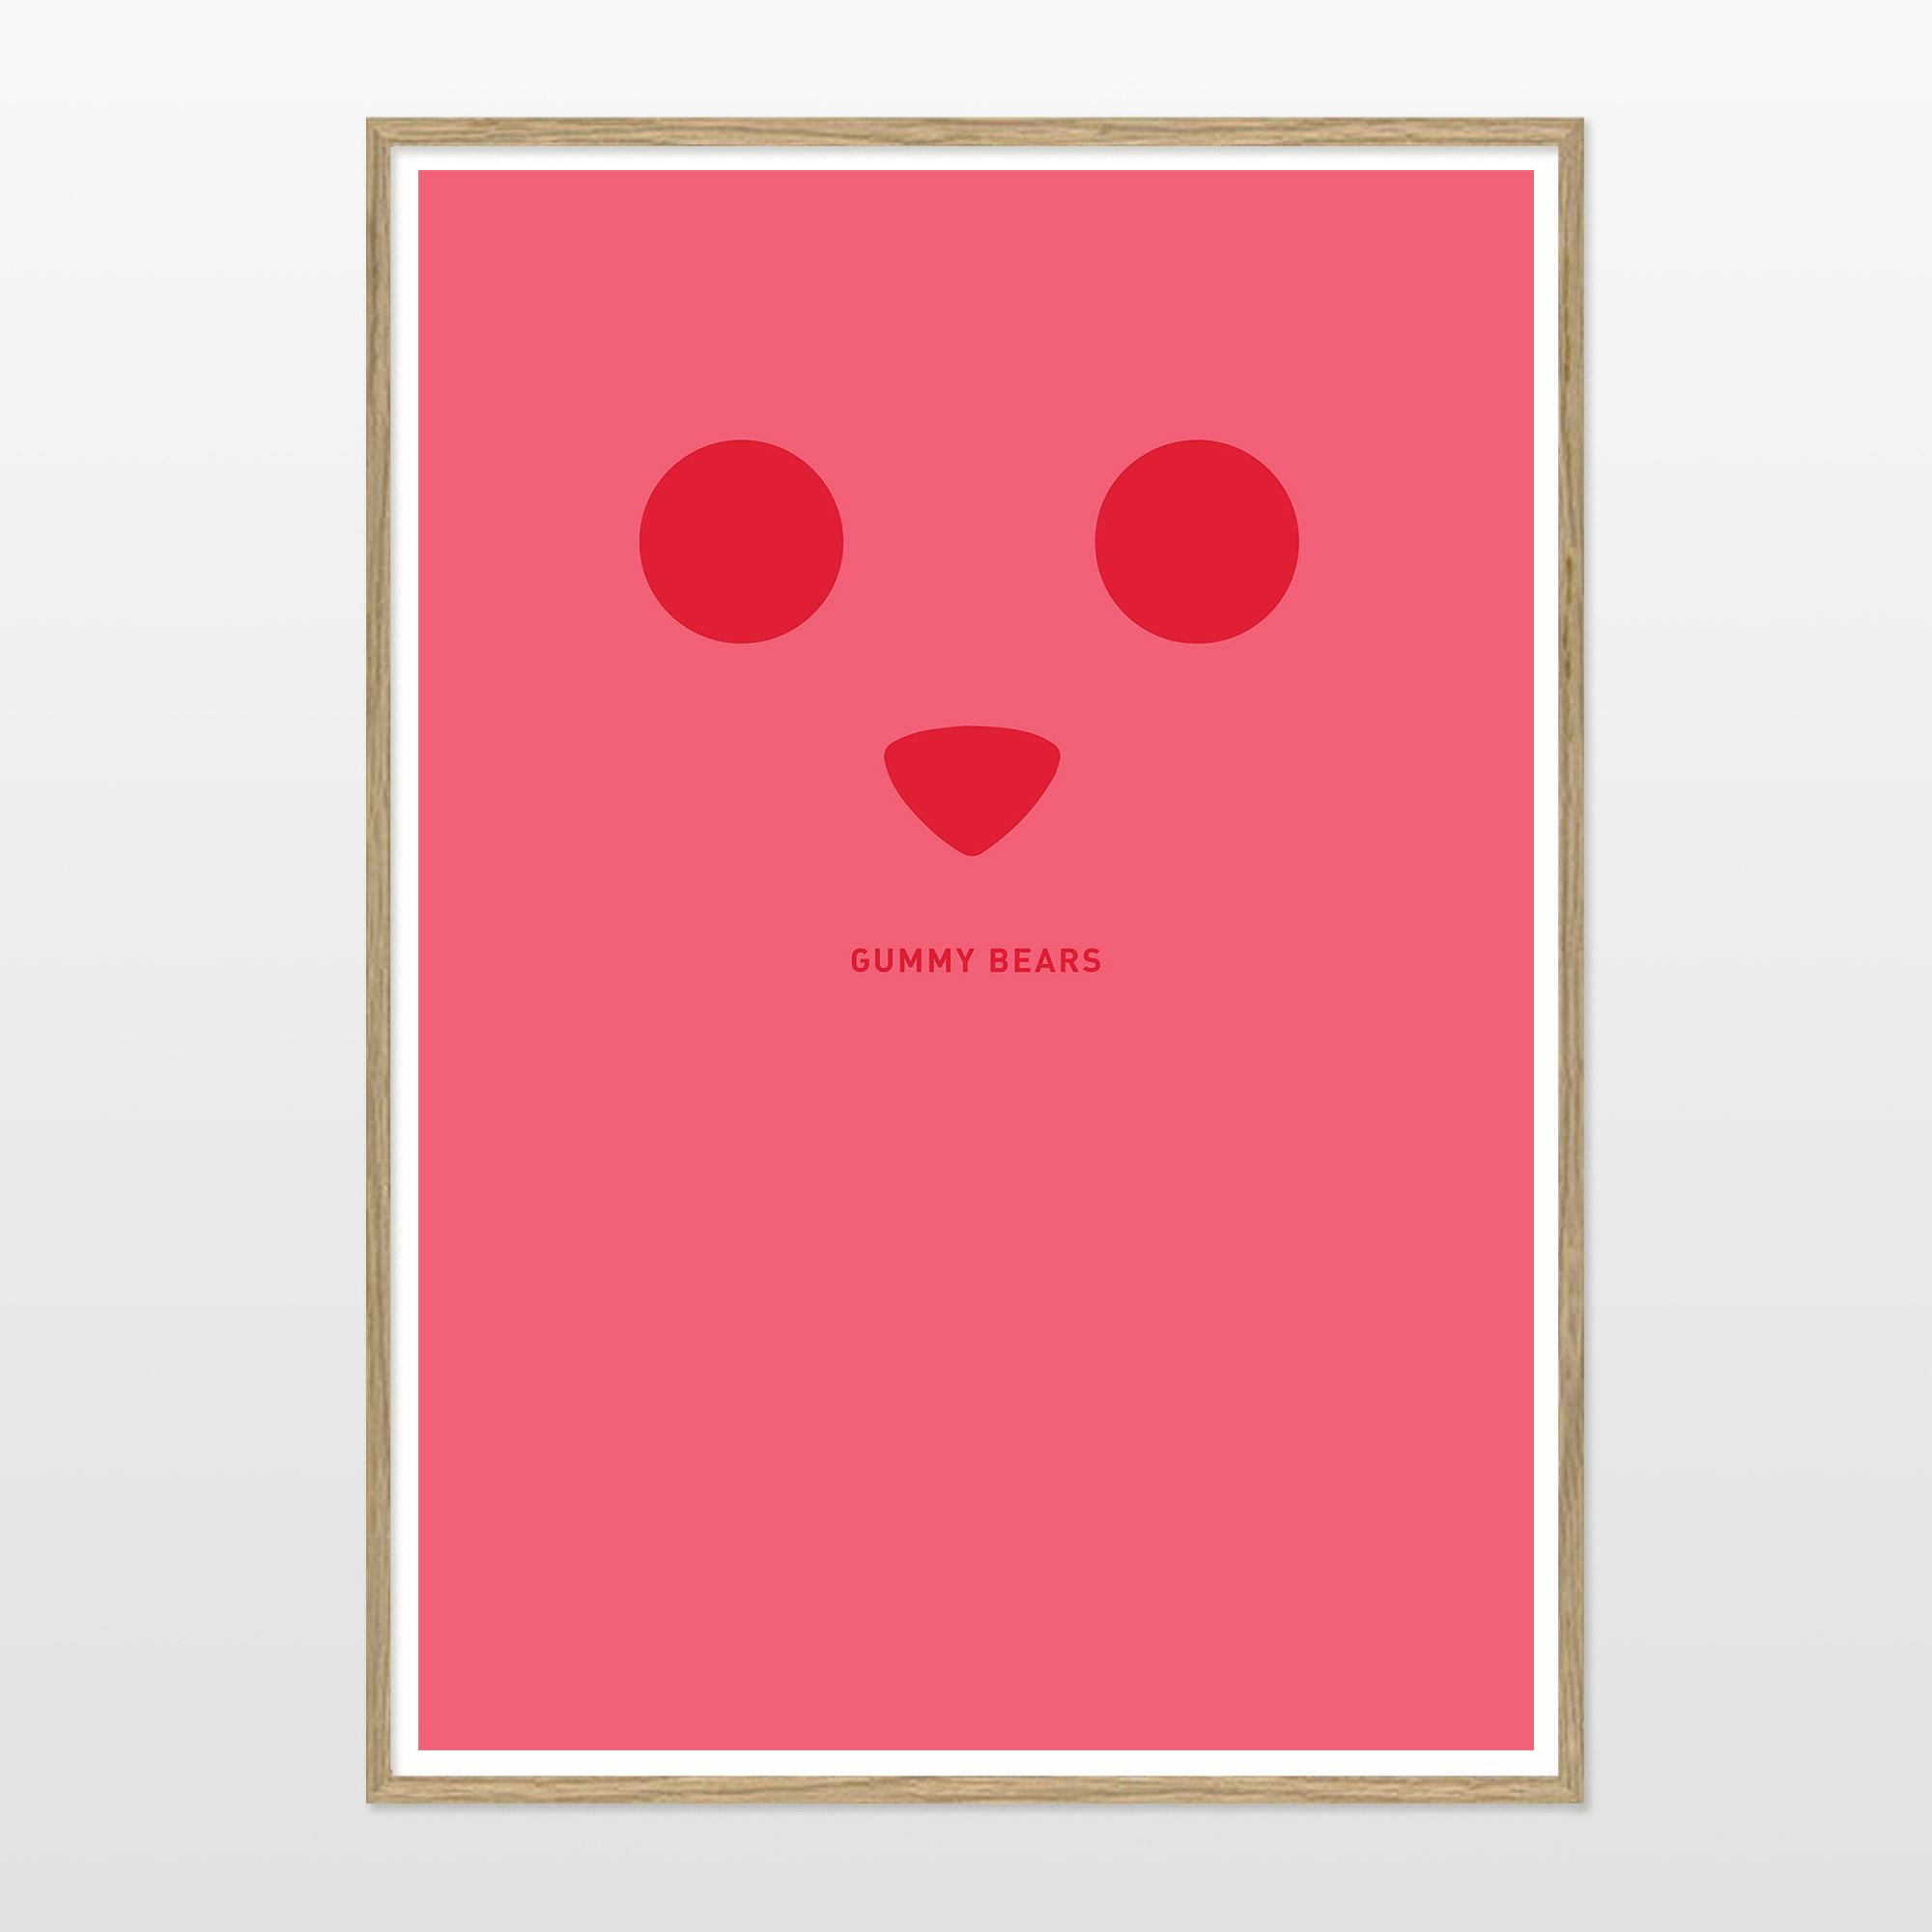 posters, giclee, aesthetic, family-friendly, graphical, minimalistic, pop, animals, cartoons, children, humor, typography, pink, red, ink, paper, baby, contemporary-art, copenhagen, cute, danish, decorative, design, interior, interior-design, modern, modern-art, nordic, pop-art, posters, prints, scandinavien, Buy original high quality art. Paintings, drawings, limited edition prints & posters by talented artists.